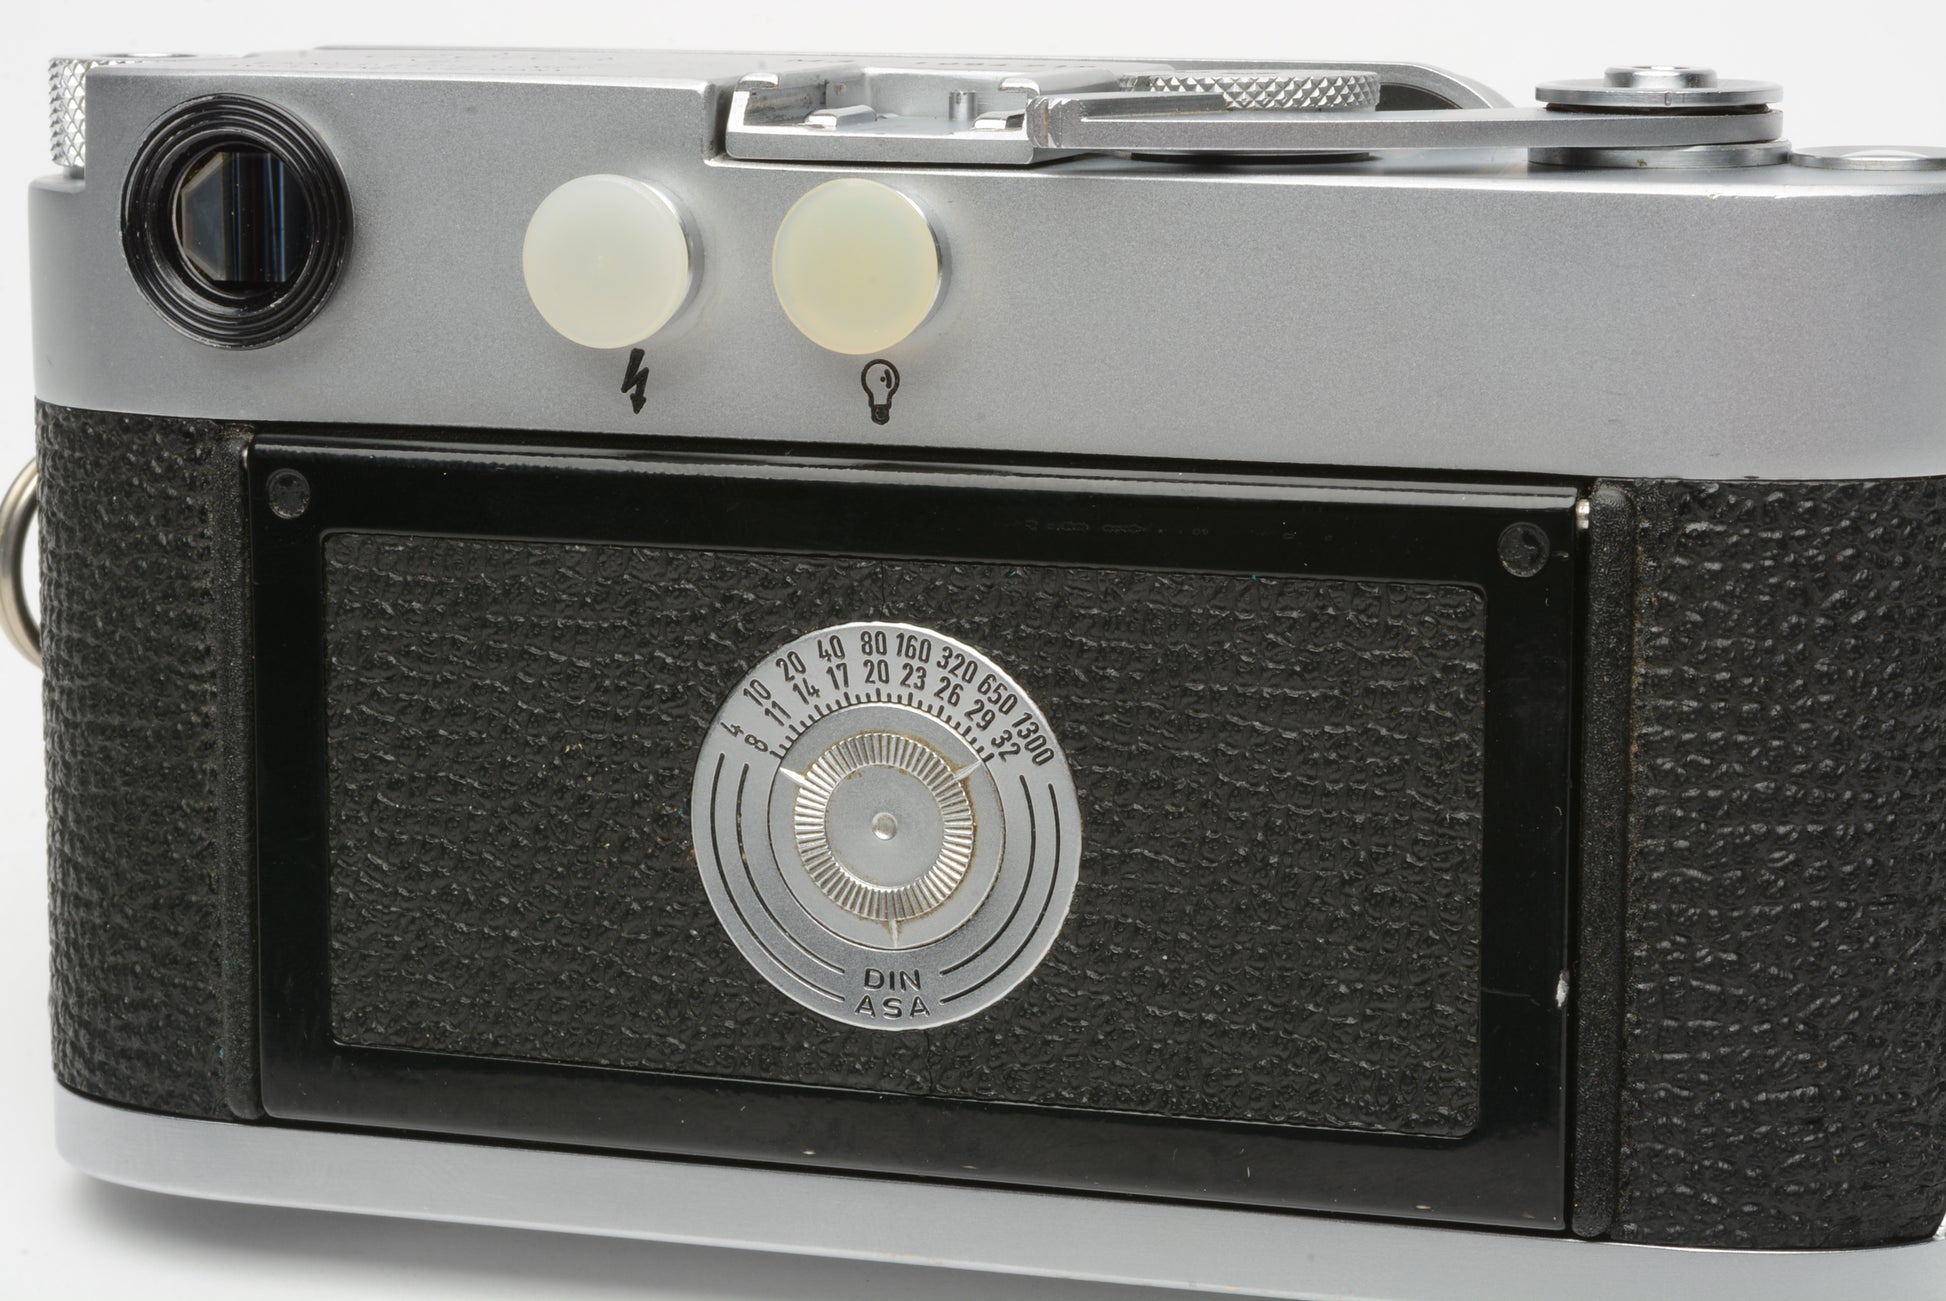 Leica IIIG with Summicron 2.0/50mm - De Wit Cameras